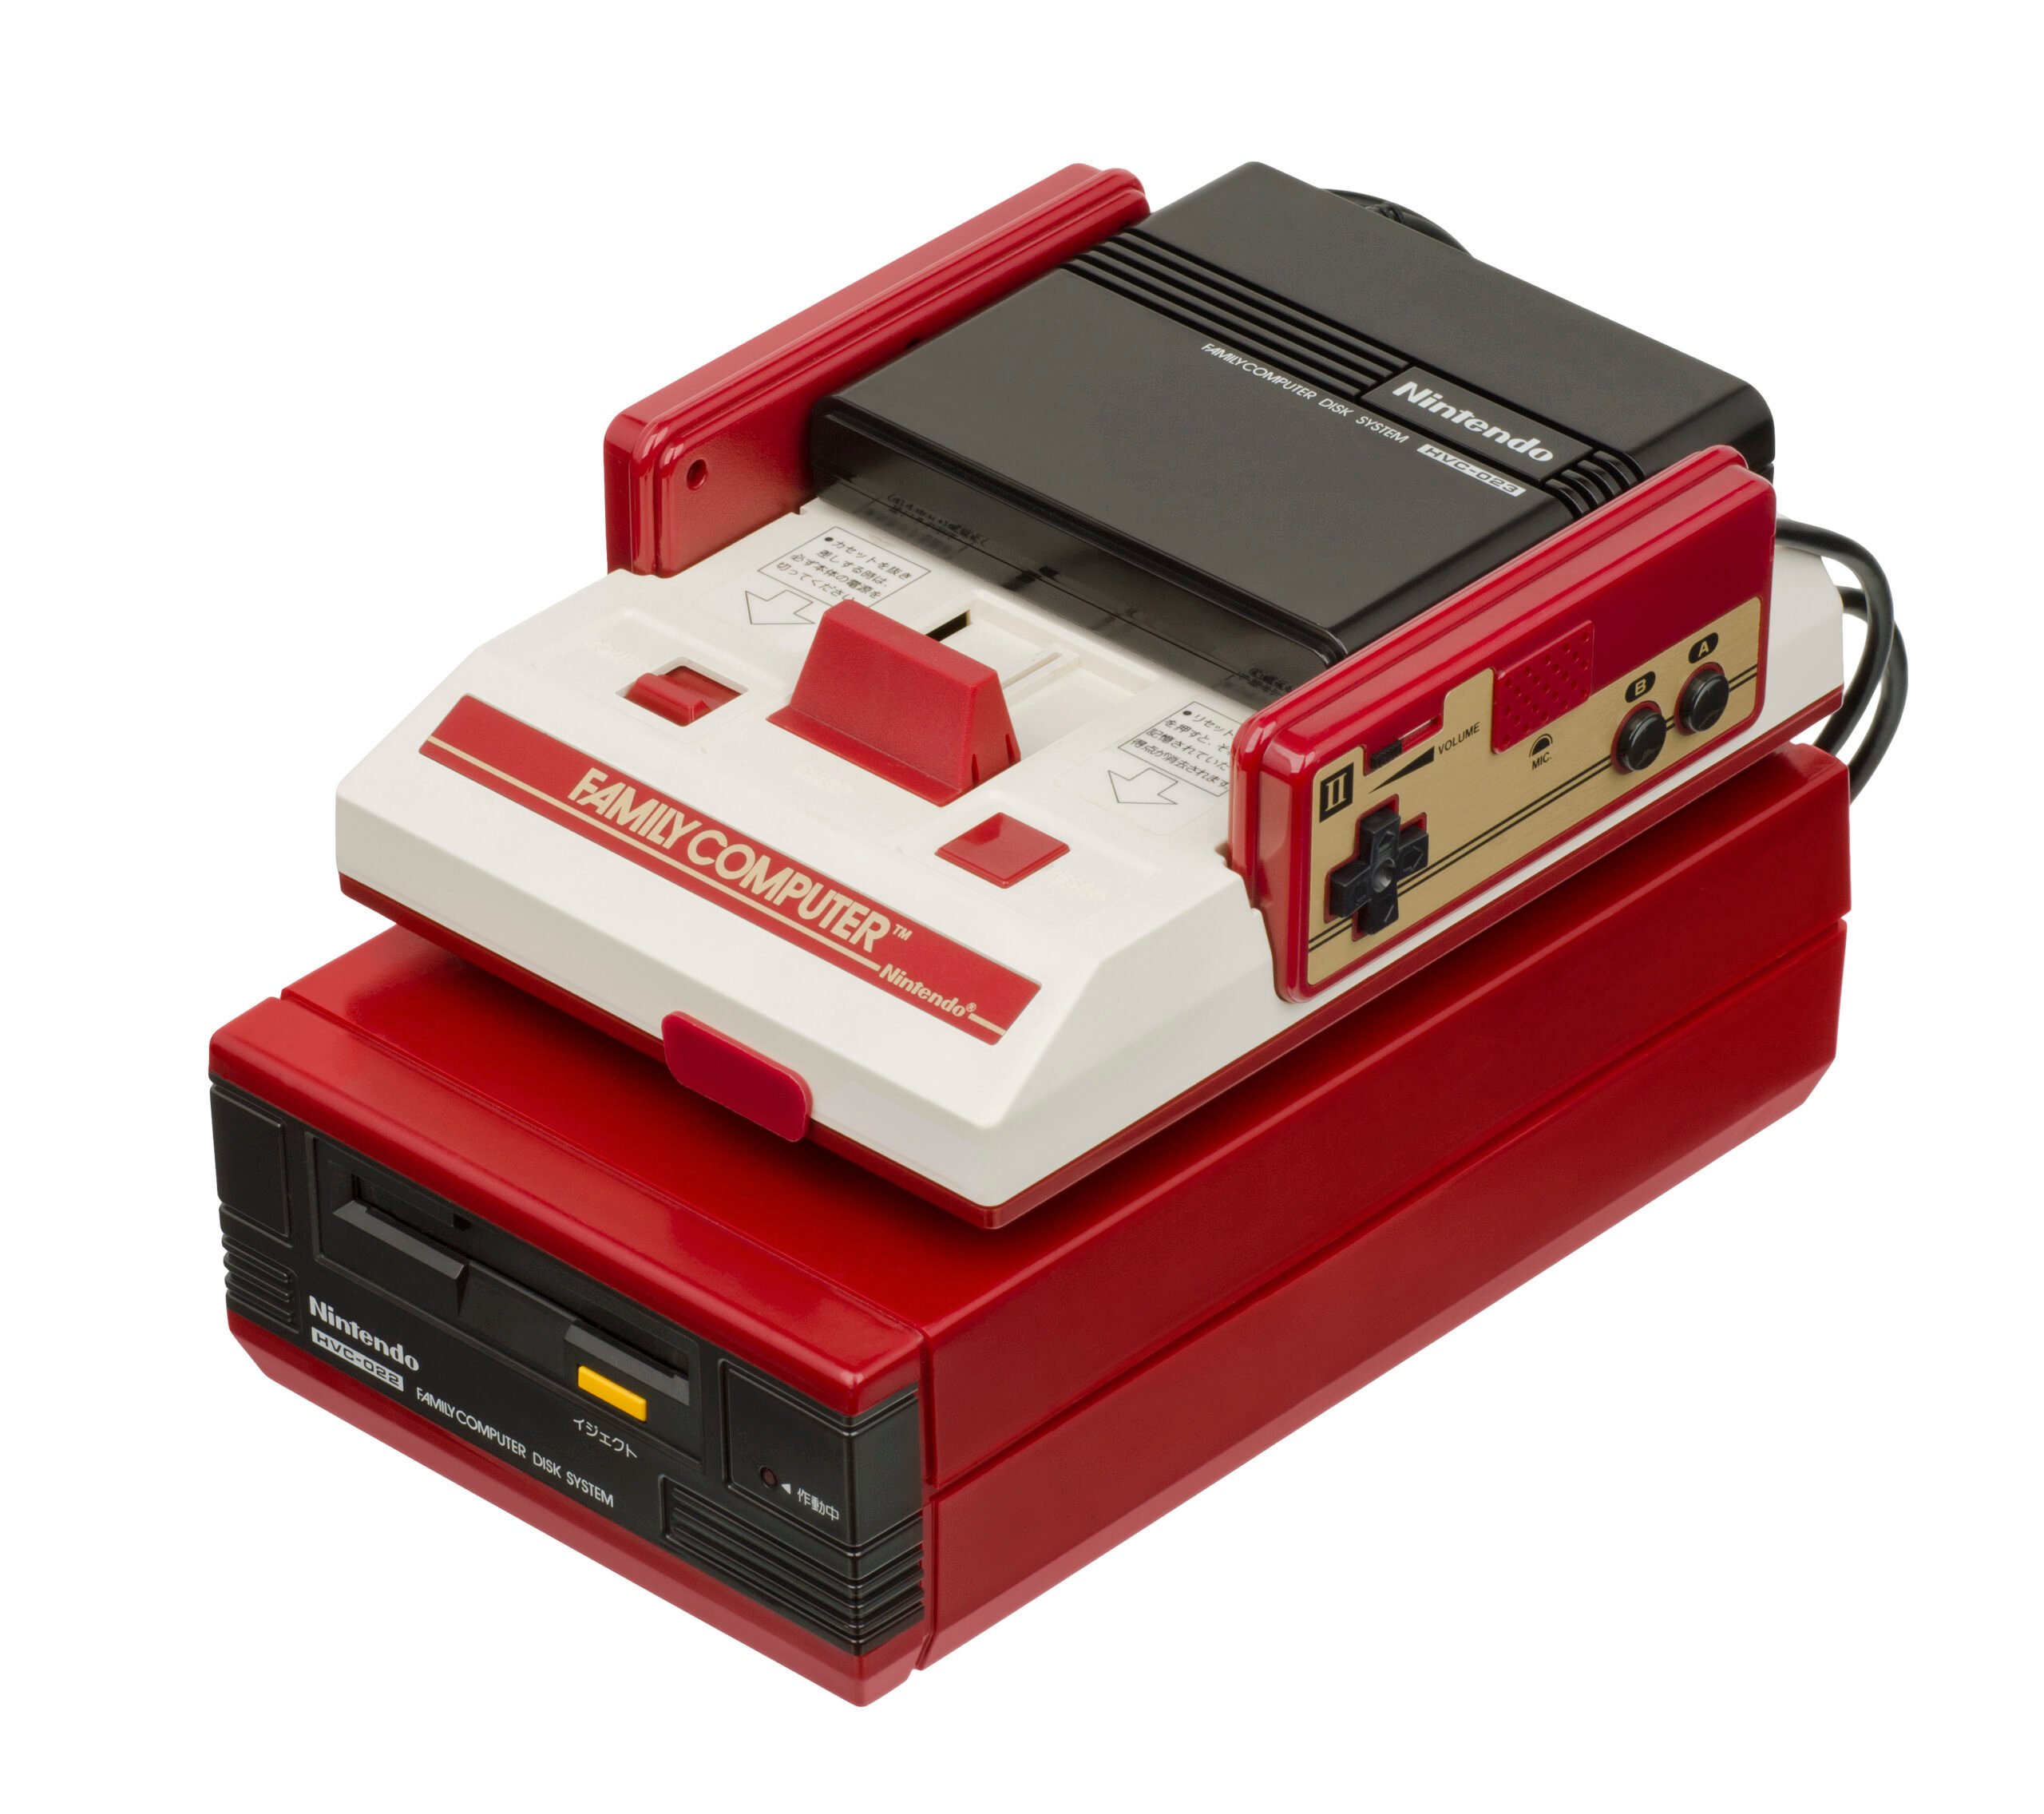 Console Command Famicom Disk System Destructoid